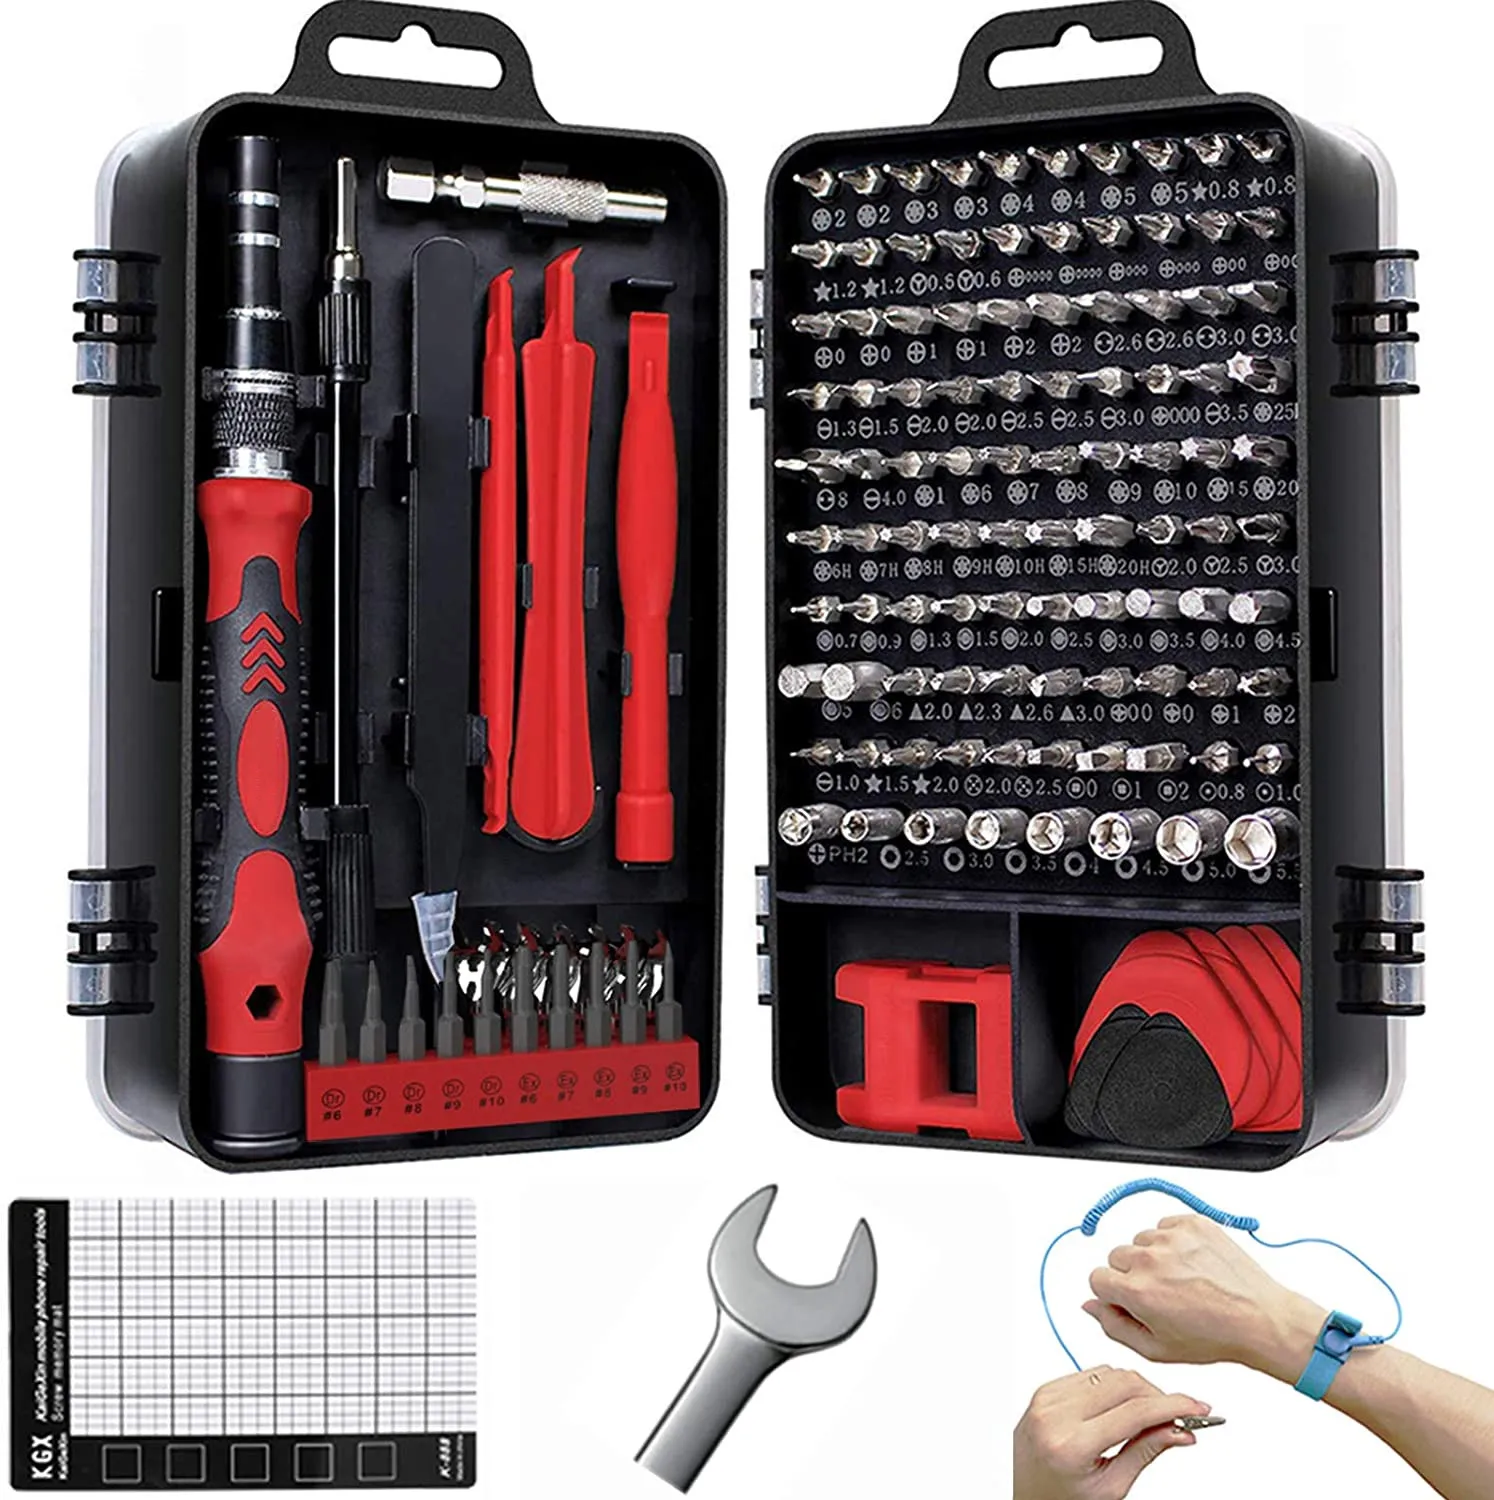 WOZOBUY 140in1 Precision Screwdriver Set for DIY Electronic Repairs-PC,Laptop,iPhone,Repairing Tools with Case Anti-Static Strap